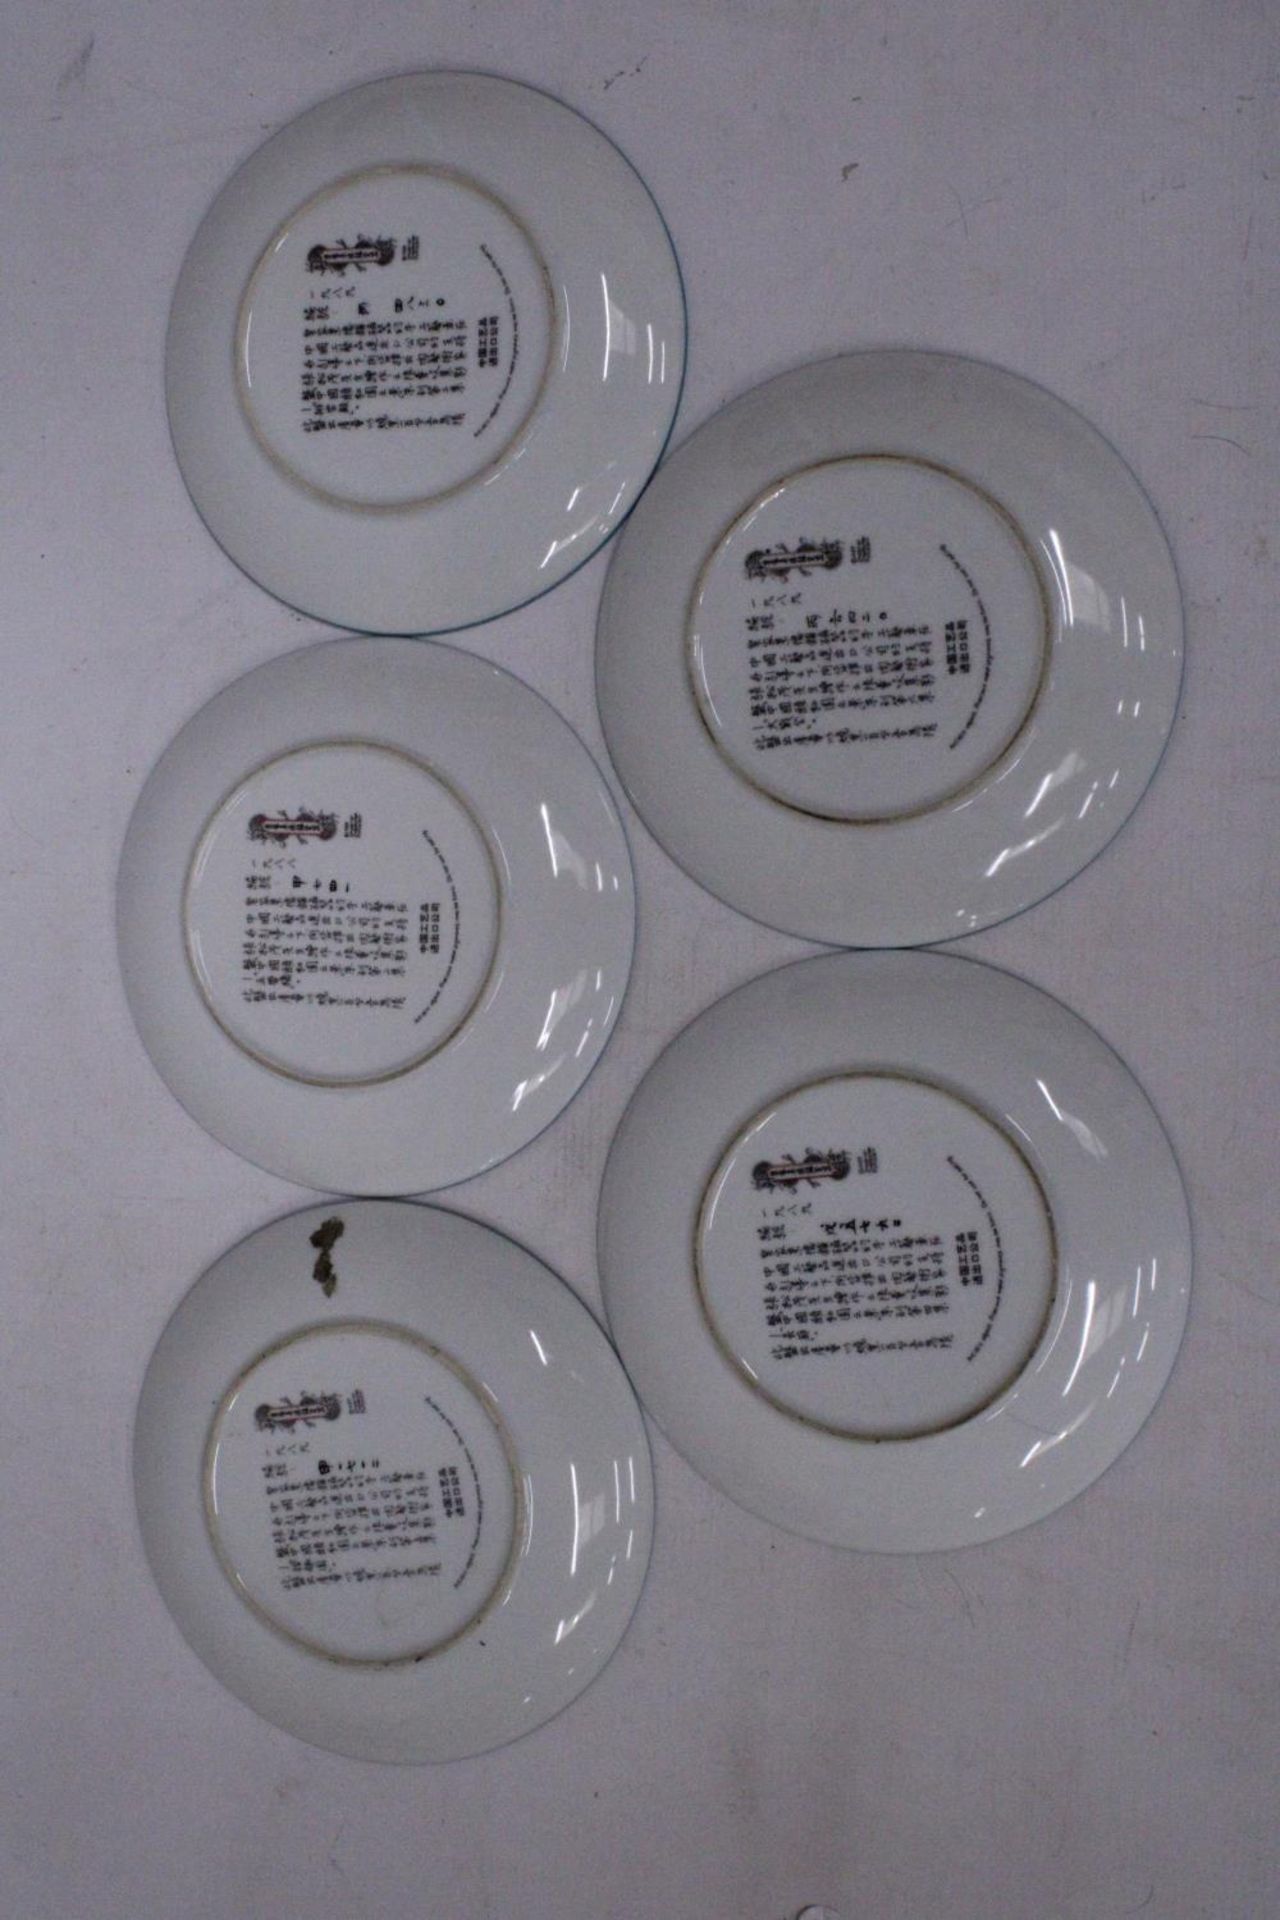 FIVE VINTAGE IMPERIAL JINGDEZHEN PORCELAIN PLATES SCENES FROM THE SUMMER PALACE - 21 CM - Image 8 of 8